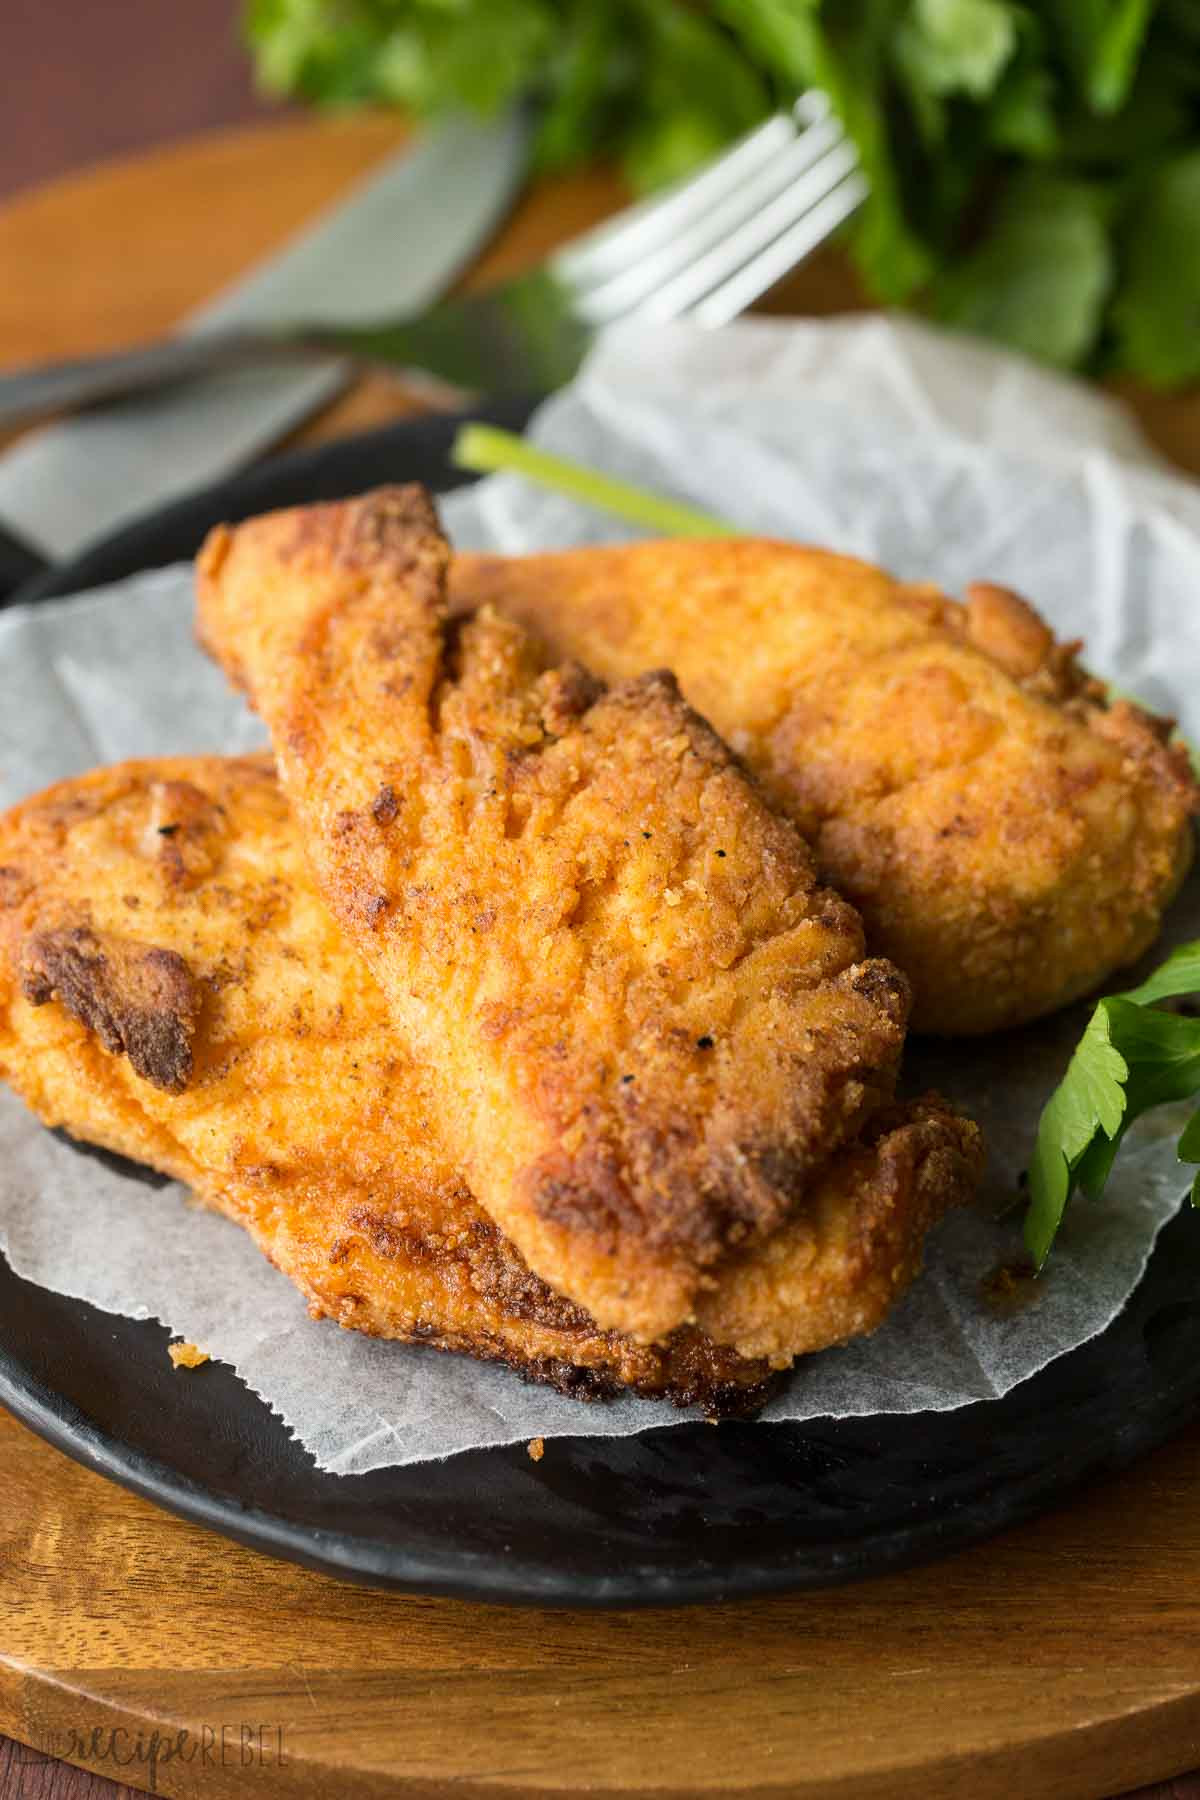 Fried Chicken In The Oven
 VIDEO The Best Oven Fried Chicken KFC Copycat